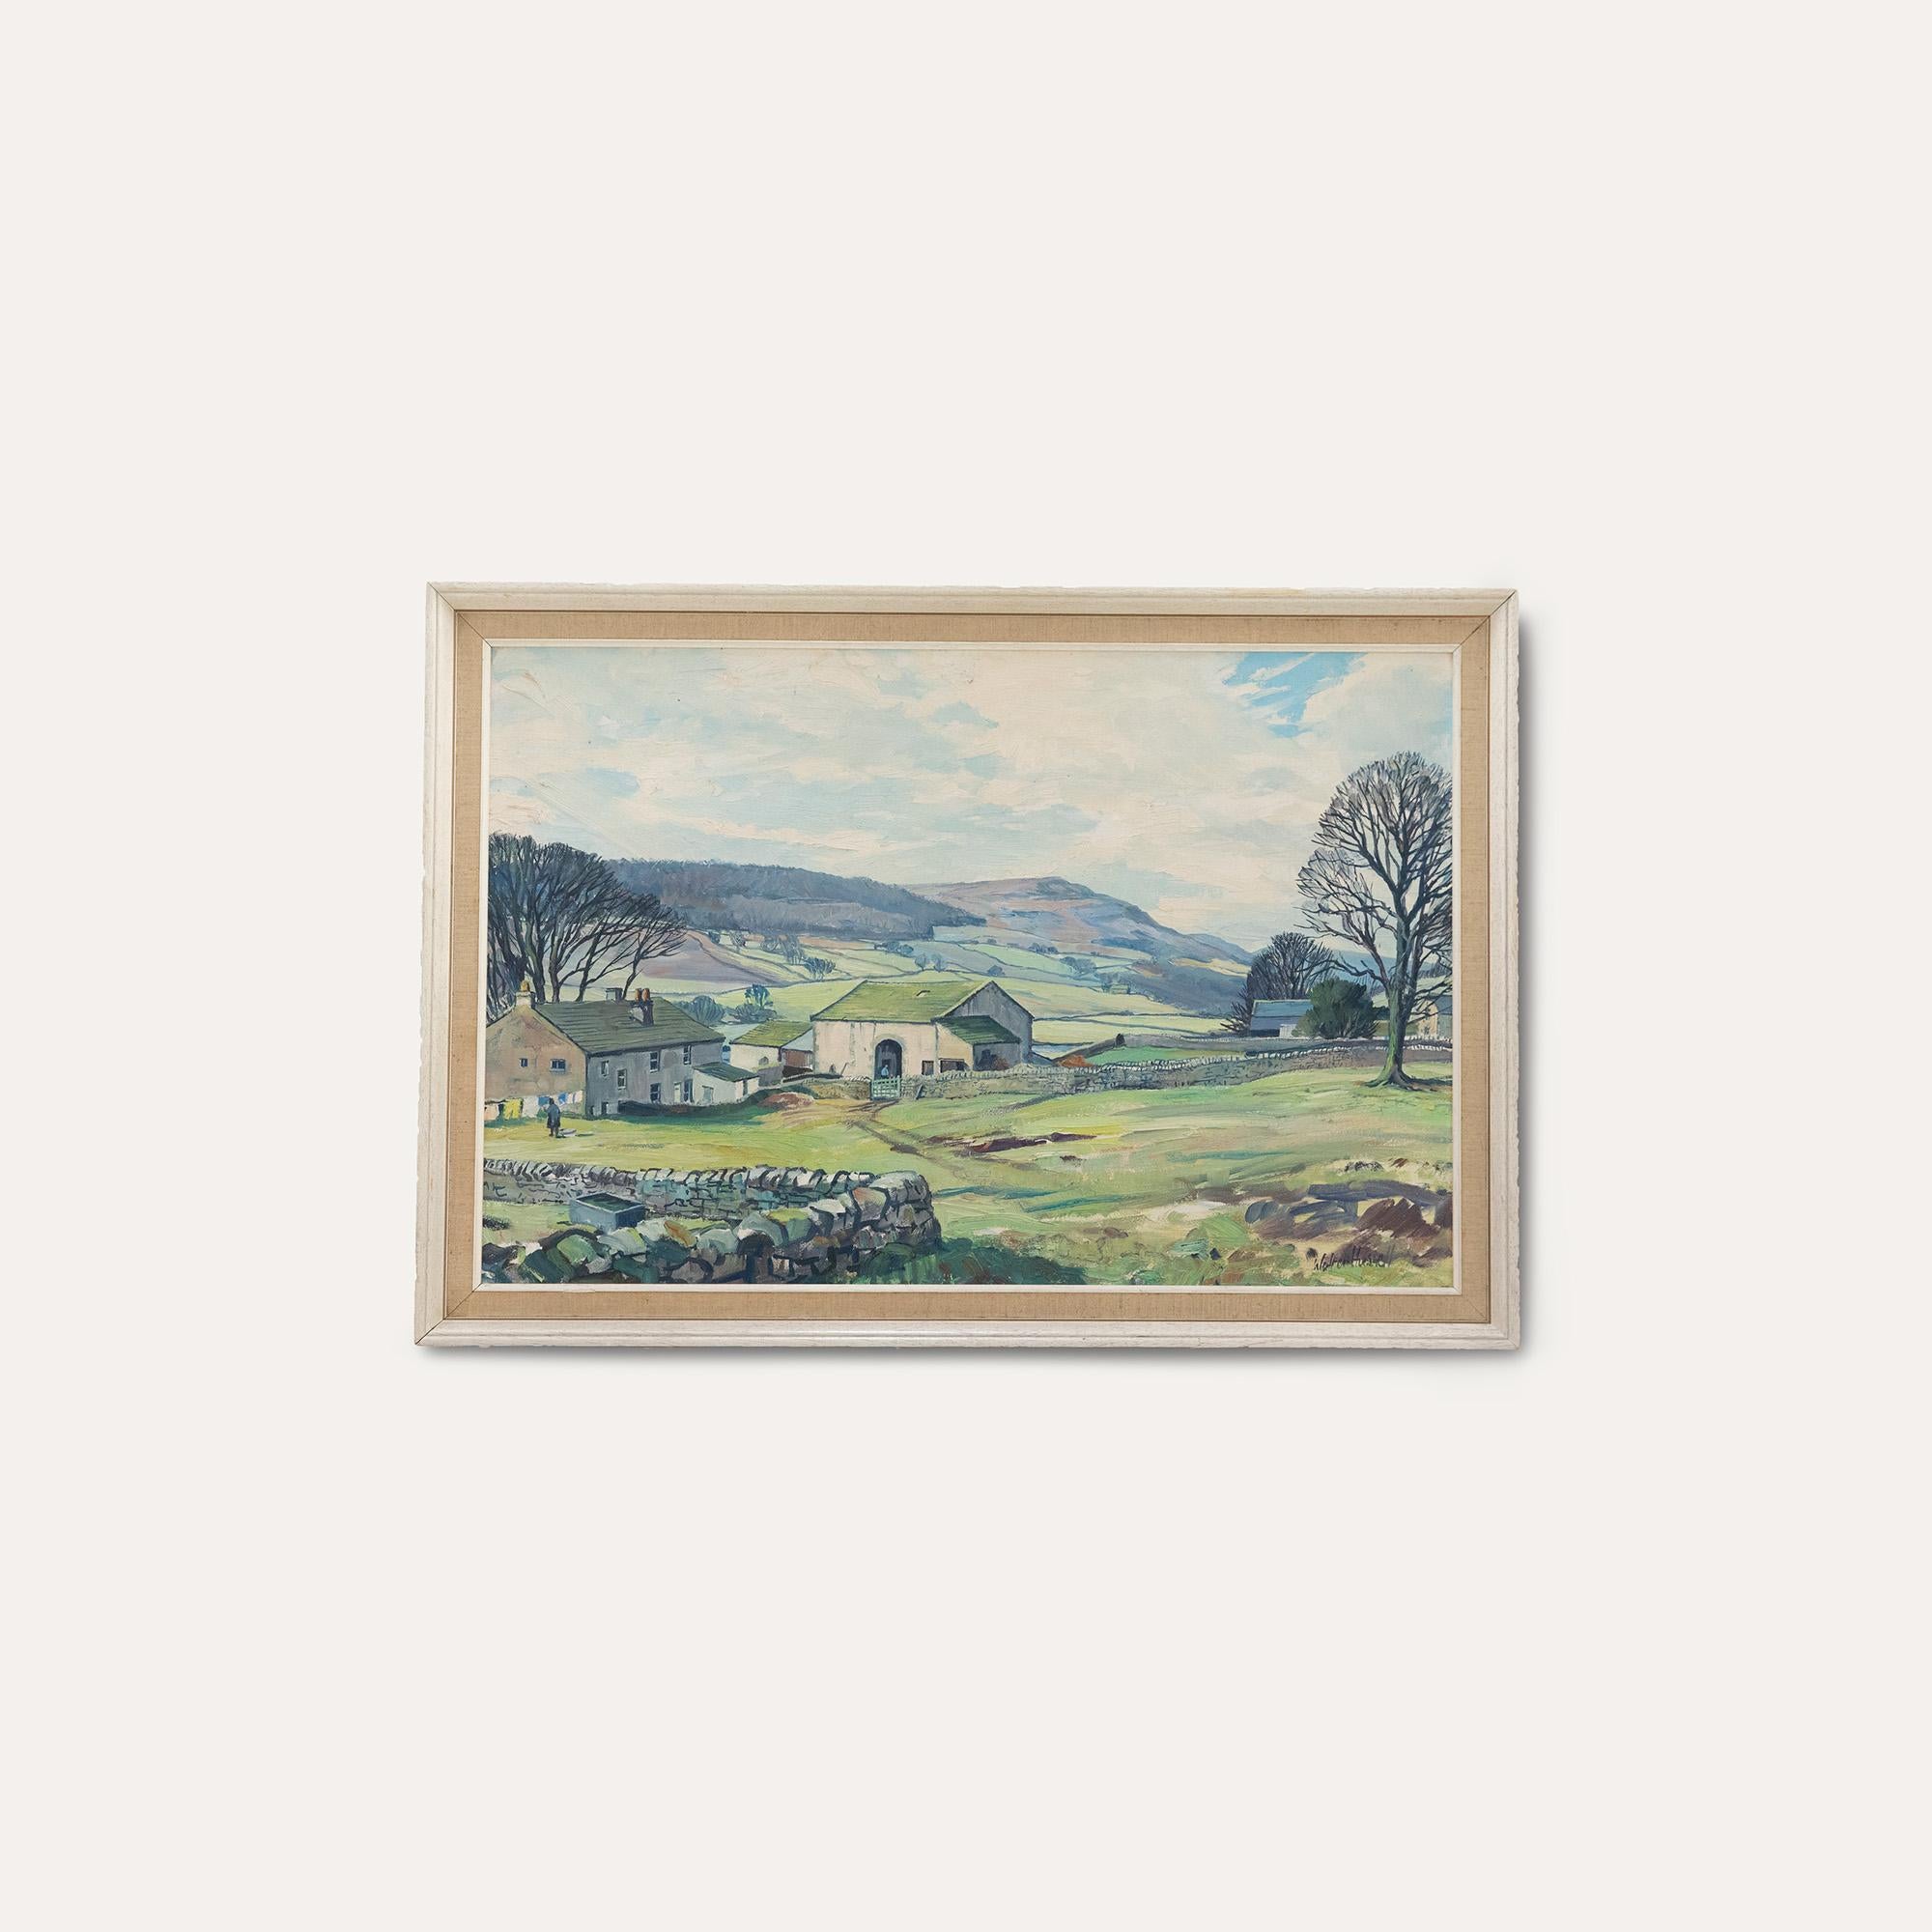 A serene North Yorkshire landscape, painted in an expressive impressionistic style with flashes of vibrant colour. The scene shows a large farmstead fenced in by drystone walls and patchwork fields. The farmer's wife can be seen hanging her washing